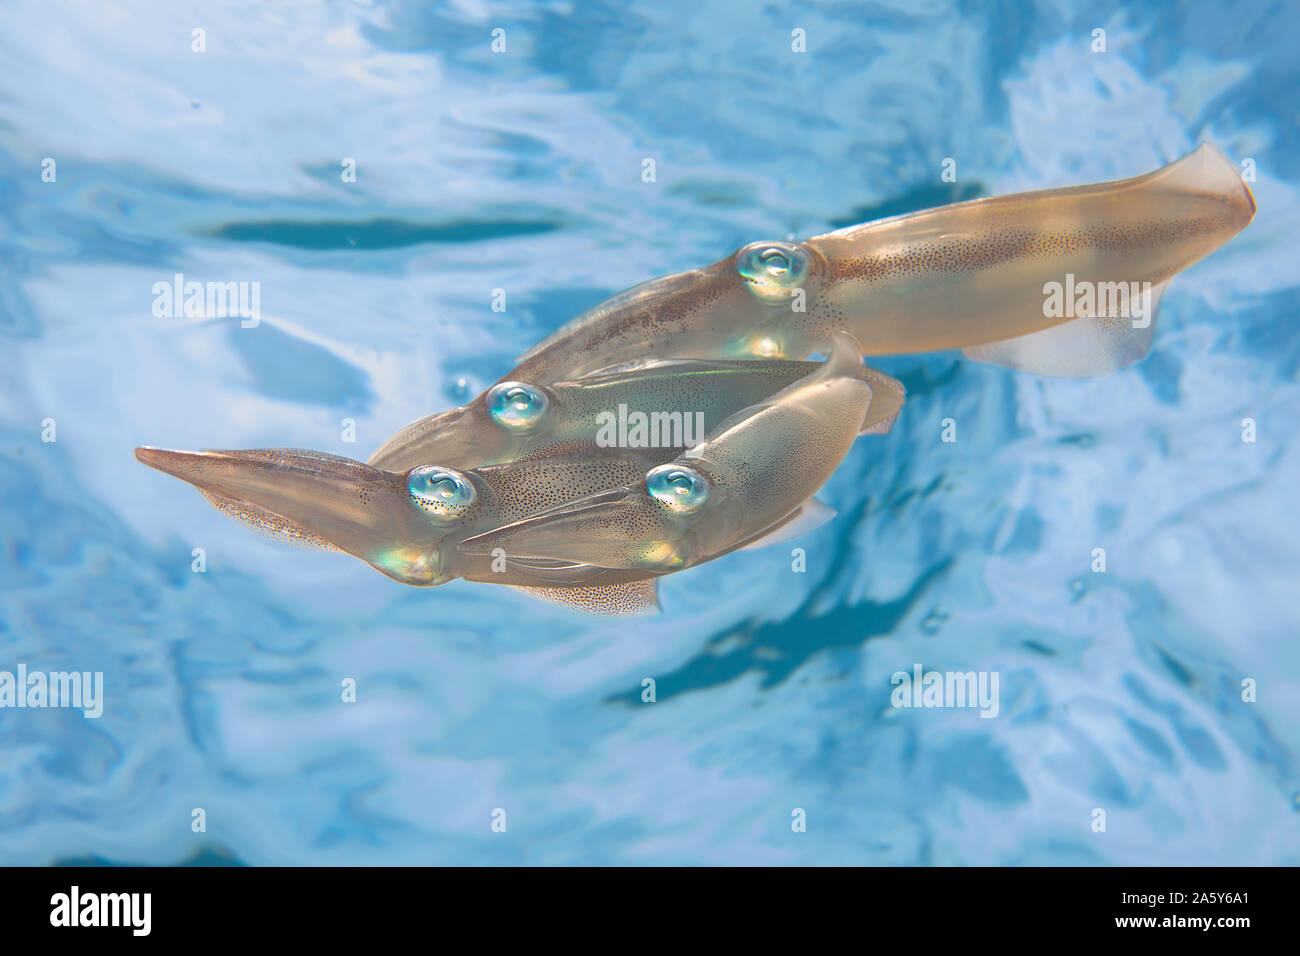 A group of four oval squid, Sepioteuthis lessoniana. These can reach 14 inches in length.  Photographed off the island of Yap, Micronesia. Stock Photo